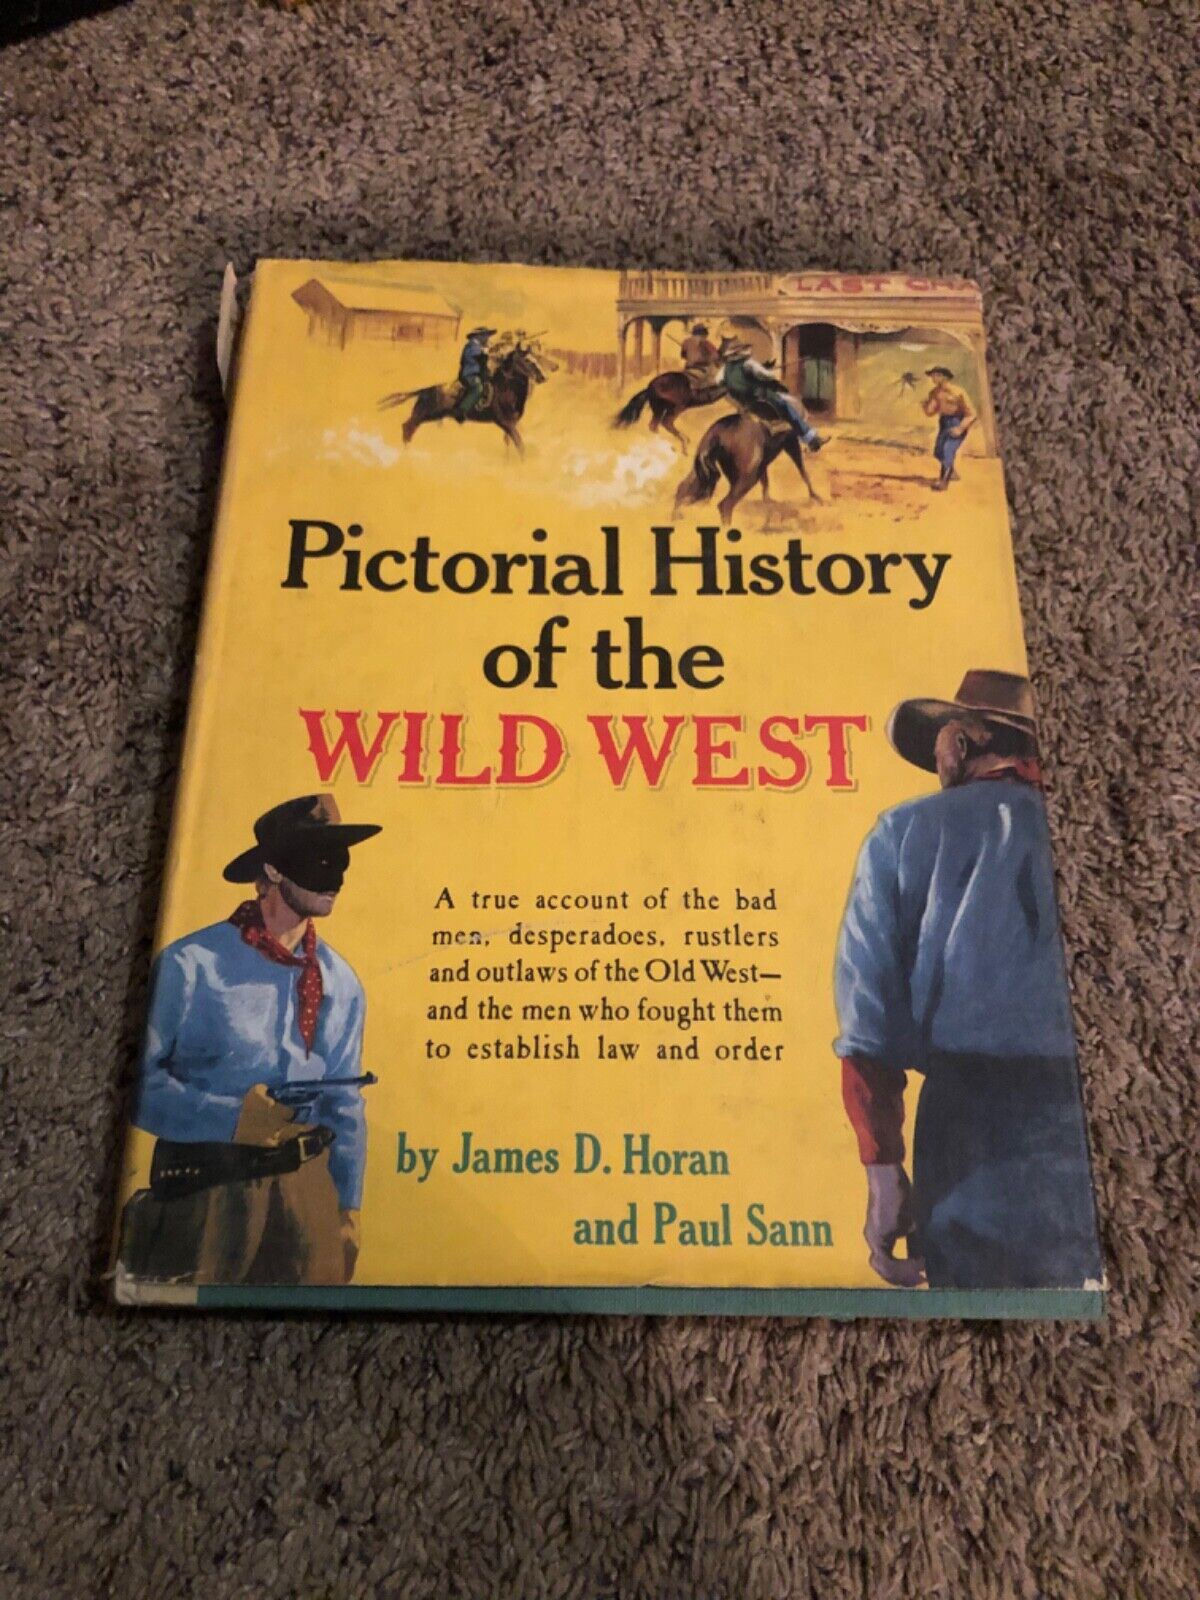 Pictorial History of the Wild West by James D. Horan & Paul Sann  (Hardcover)